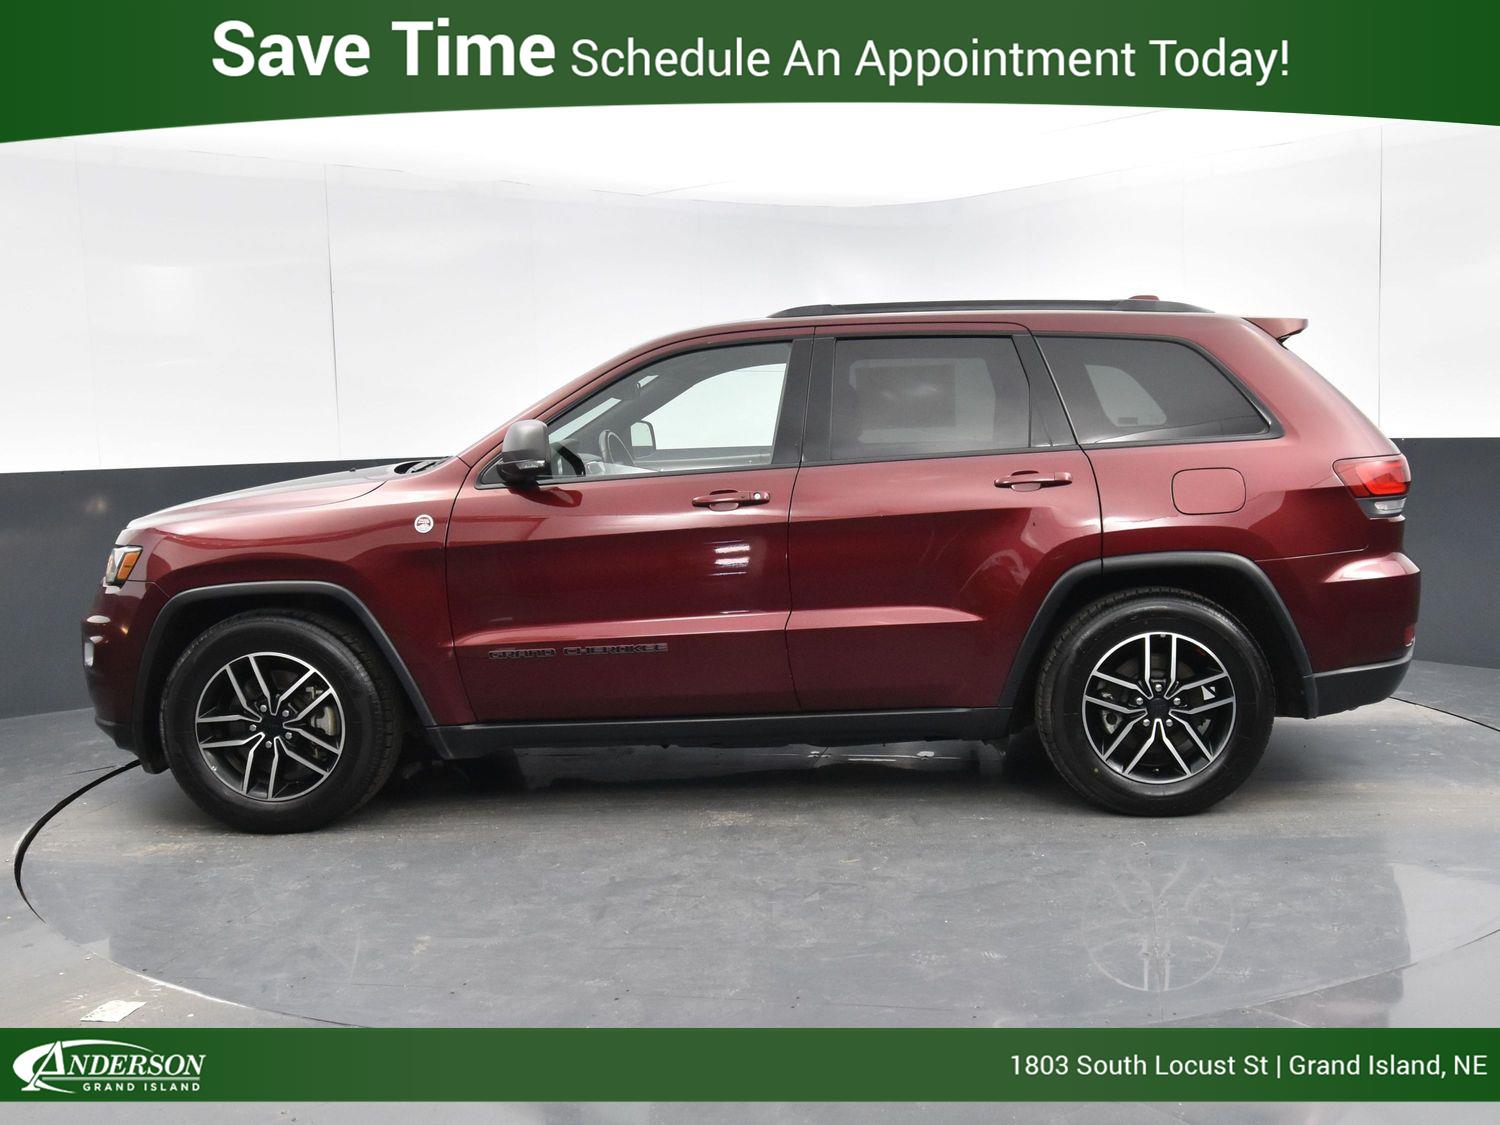 Used 2021 Jeep Grand Cherokee Trailhawk Stock: 13001719